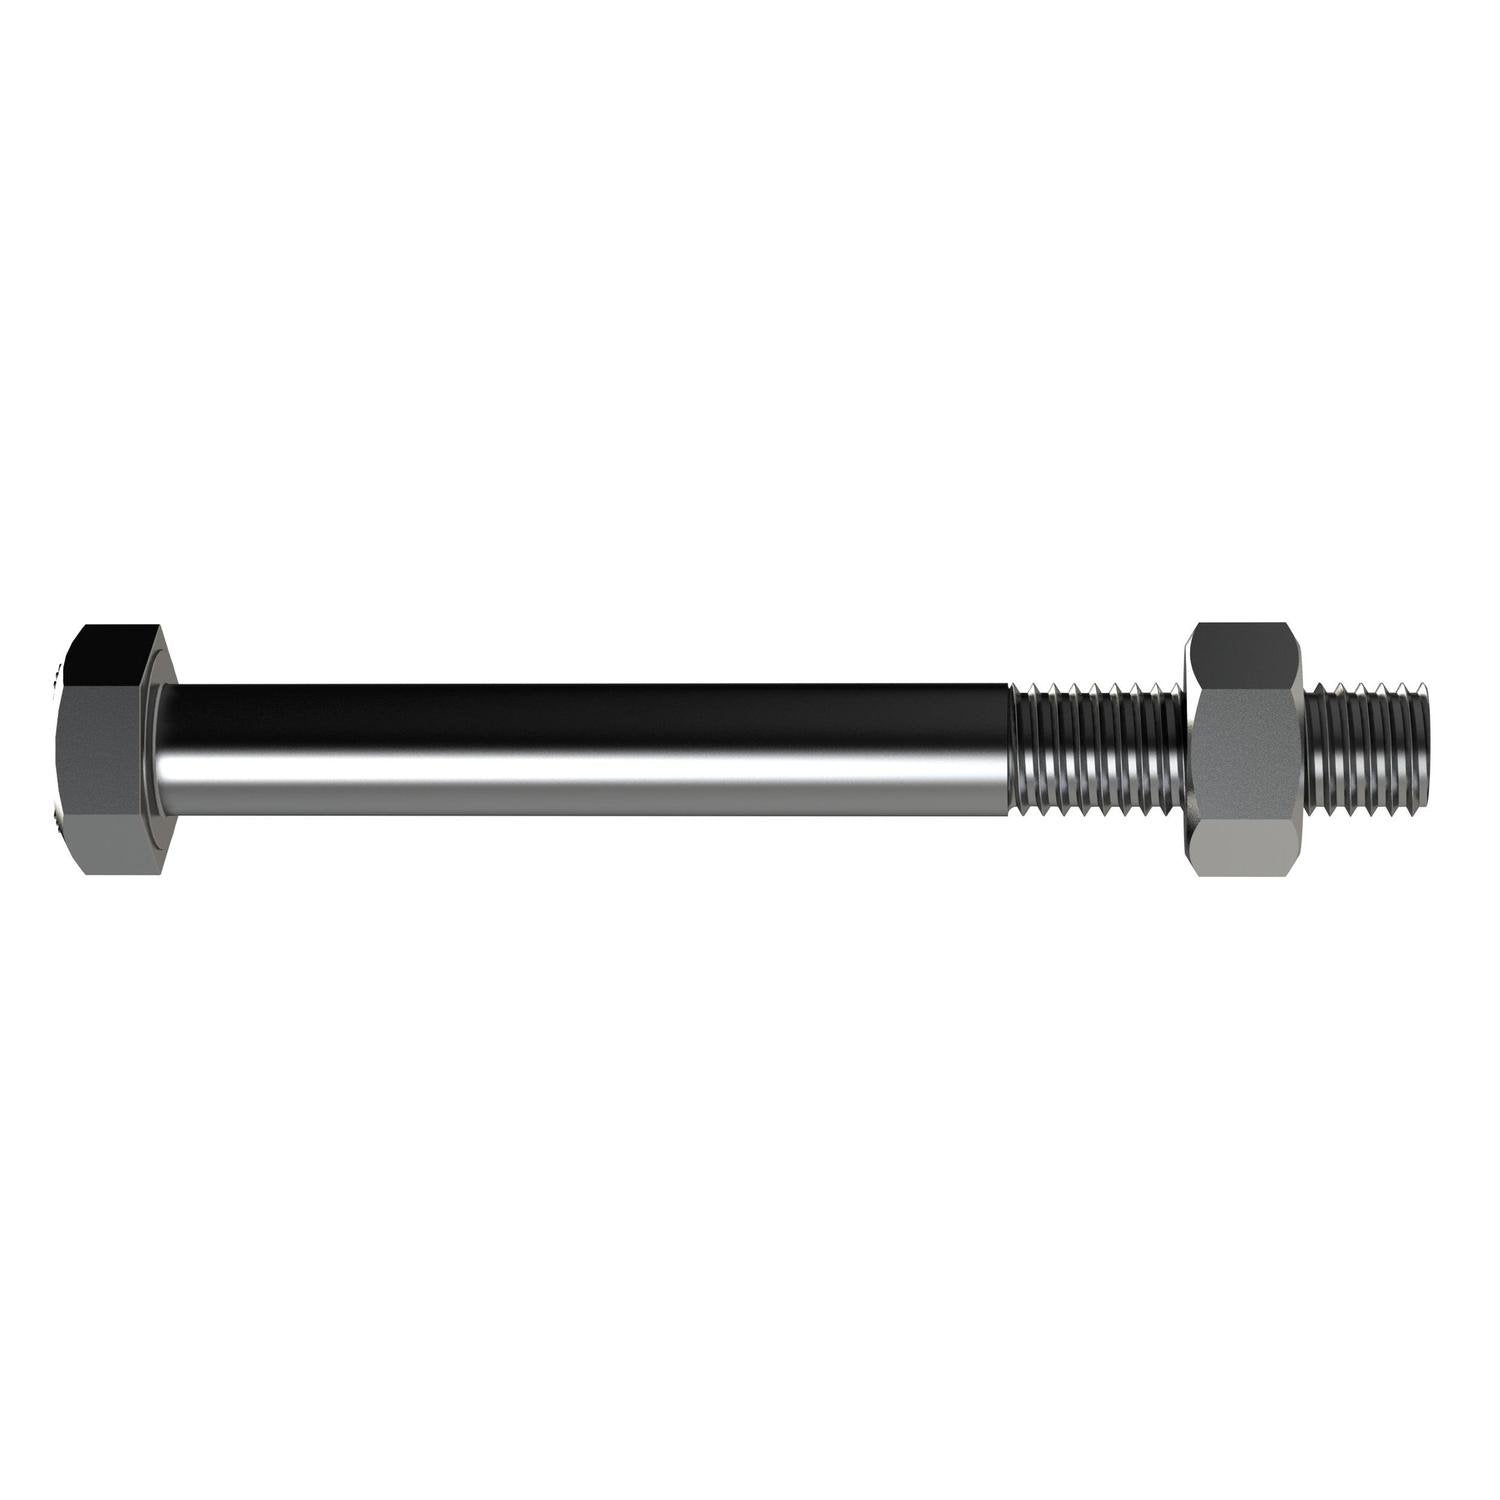 Bremick Engineer Bolts M12 X 220Mm Stainless Steel 316 (25 Pack)